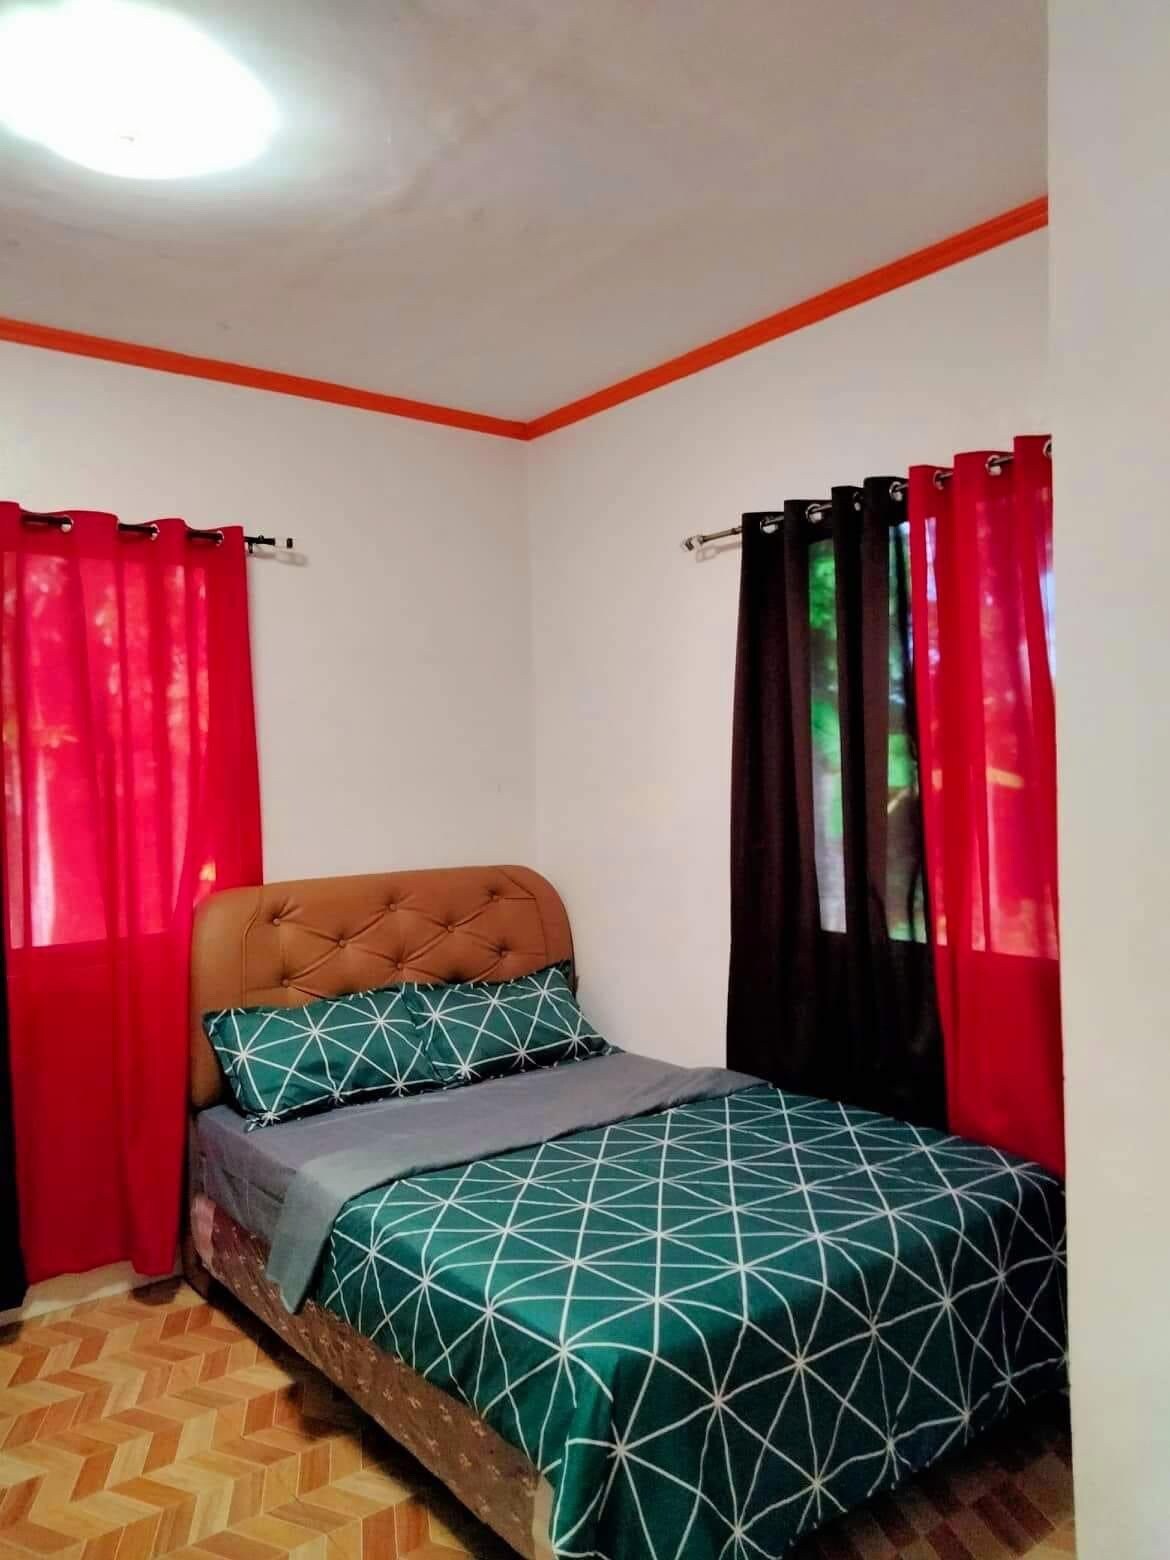 House for rent for foreigners in Lazi, Siquijor!